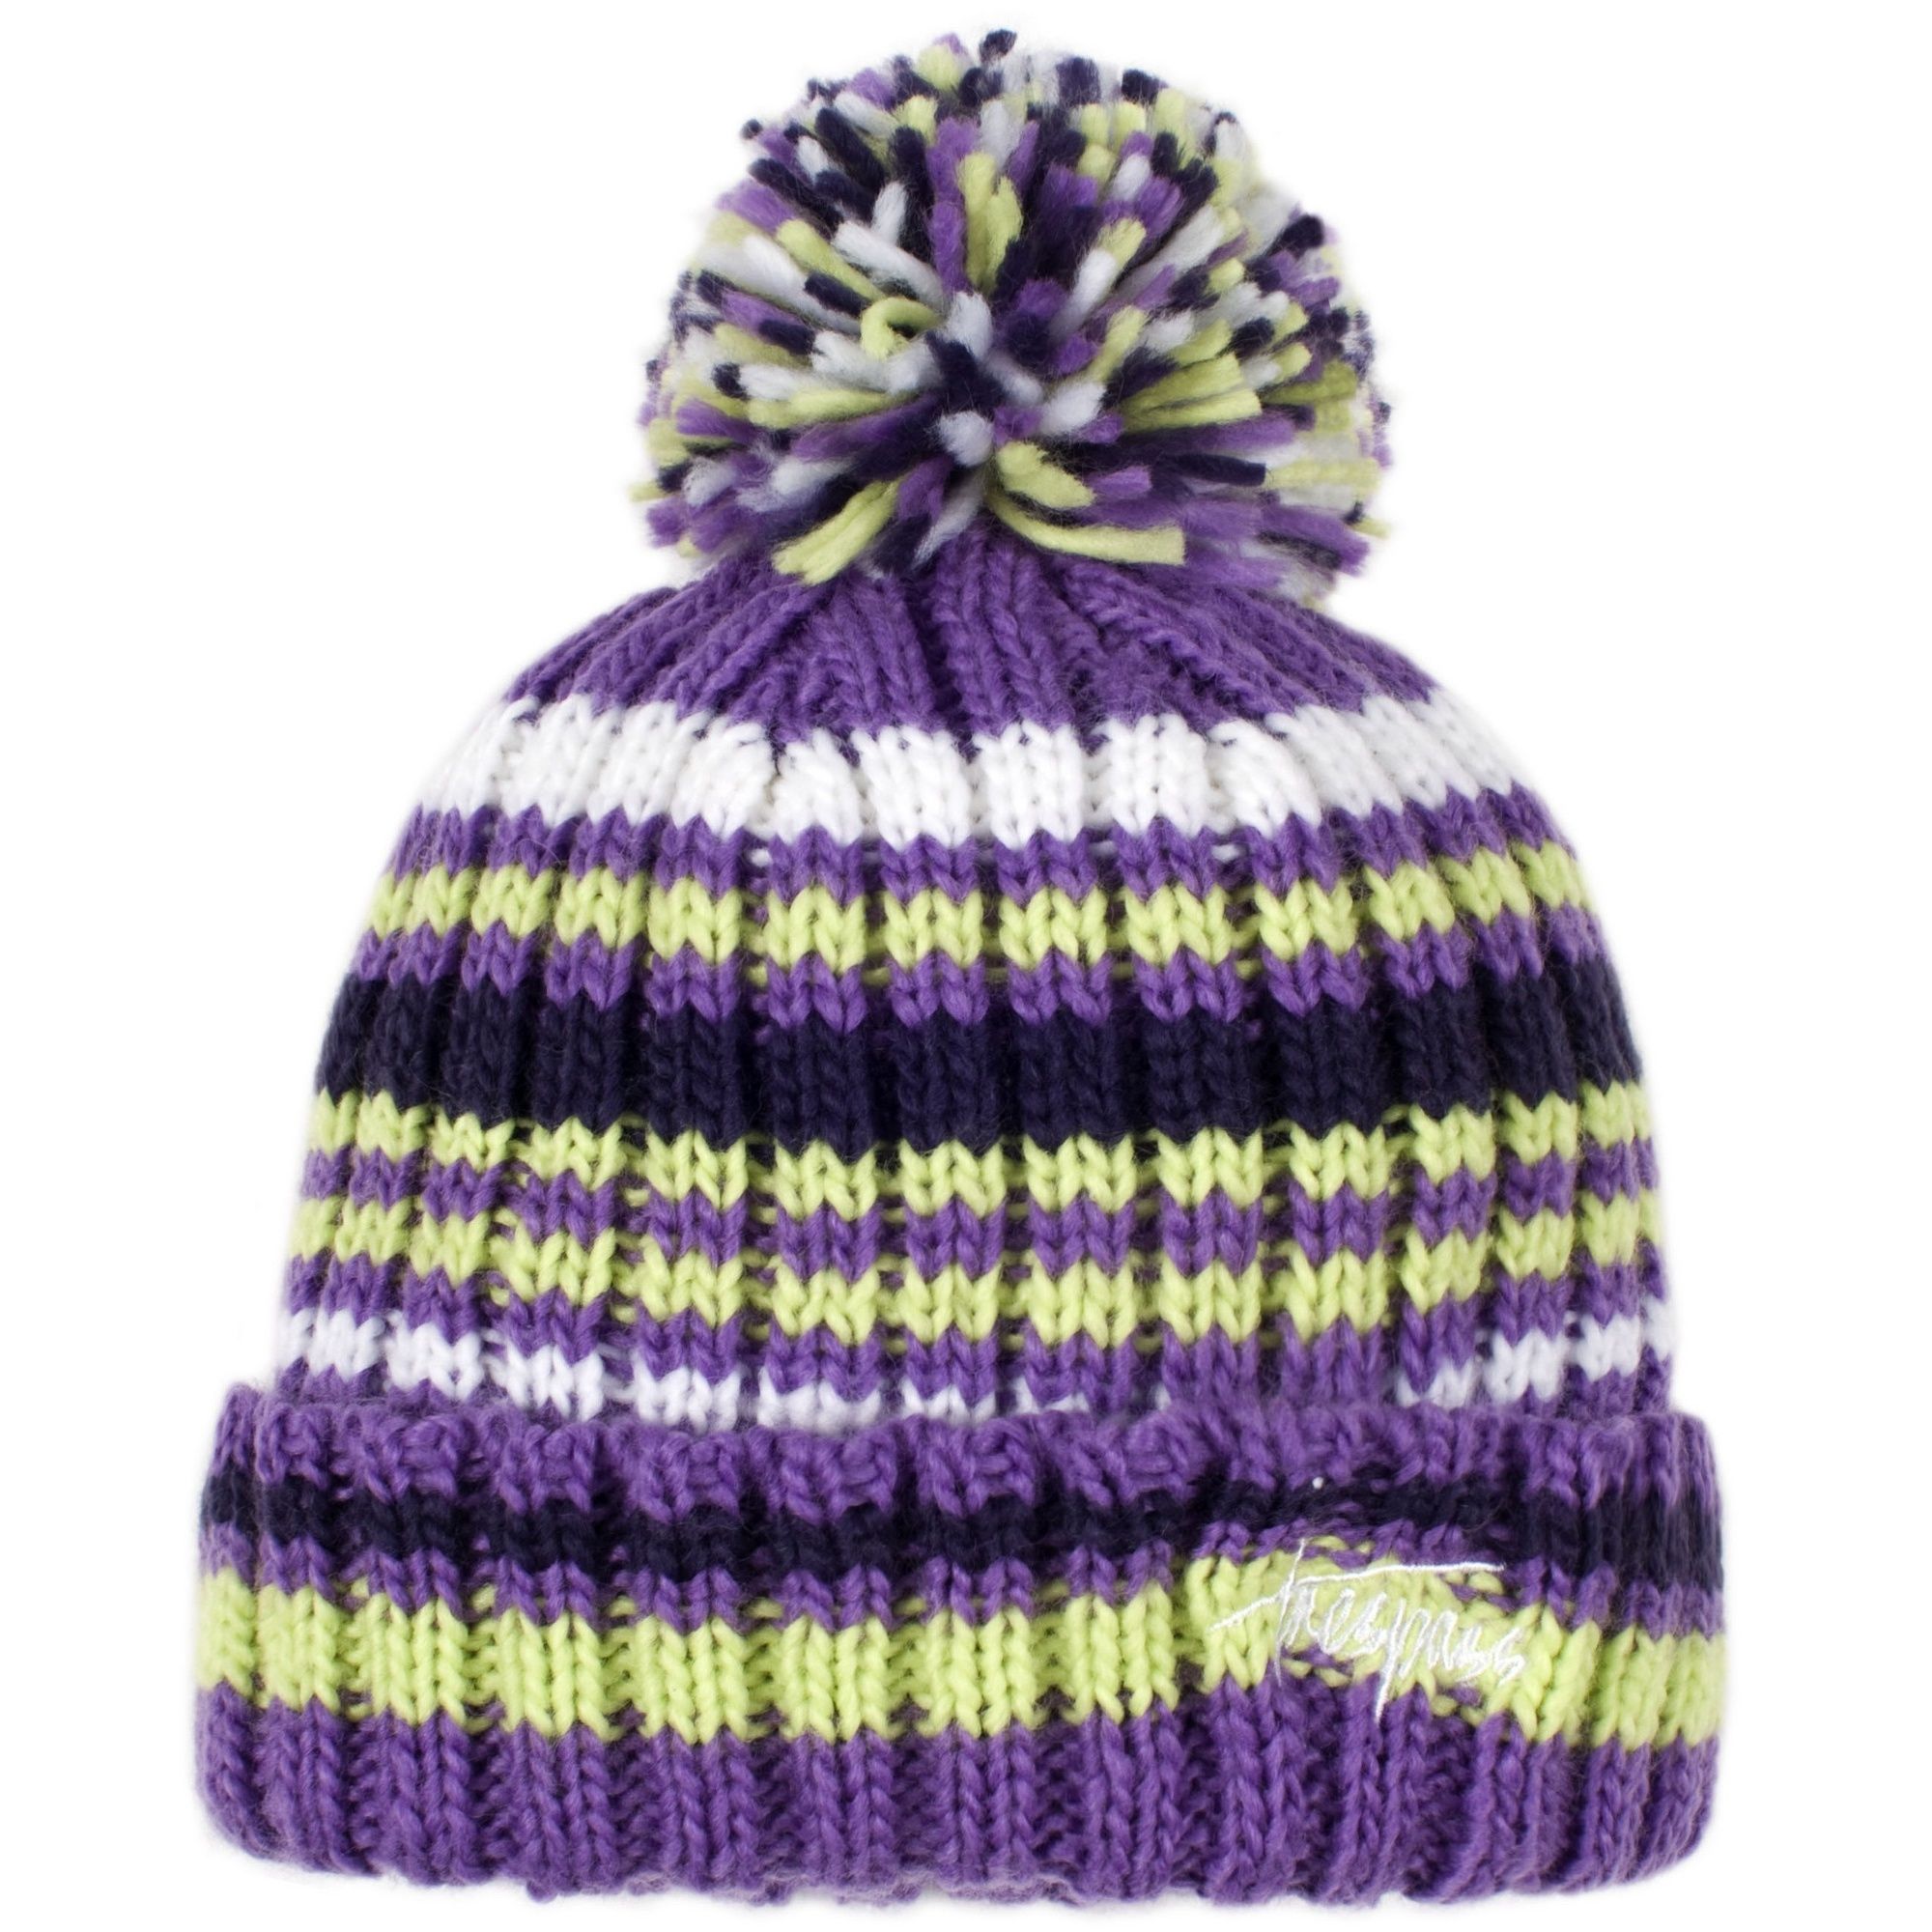 Shell is 100% acrylic. Lining is 100% polyester. Knitted hat. Embroidered detail. Large pom pom.